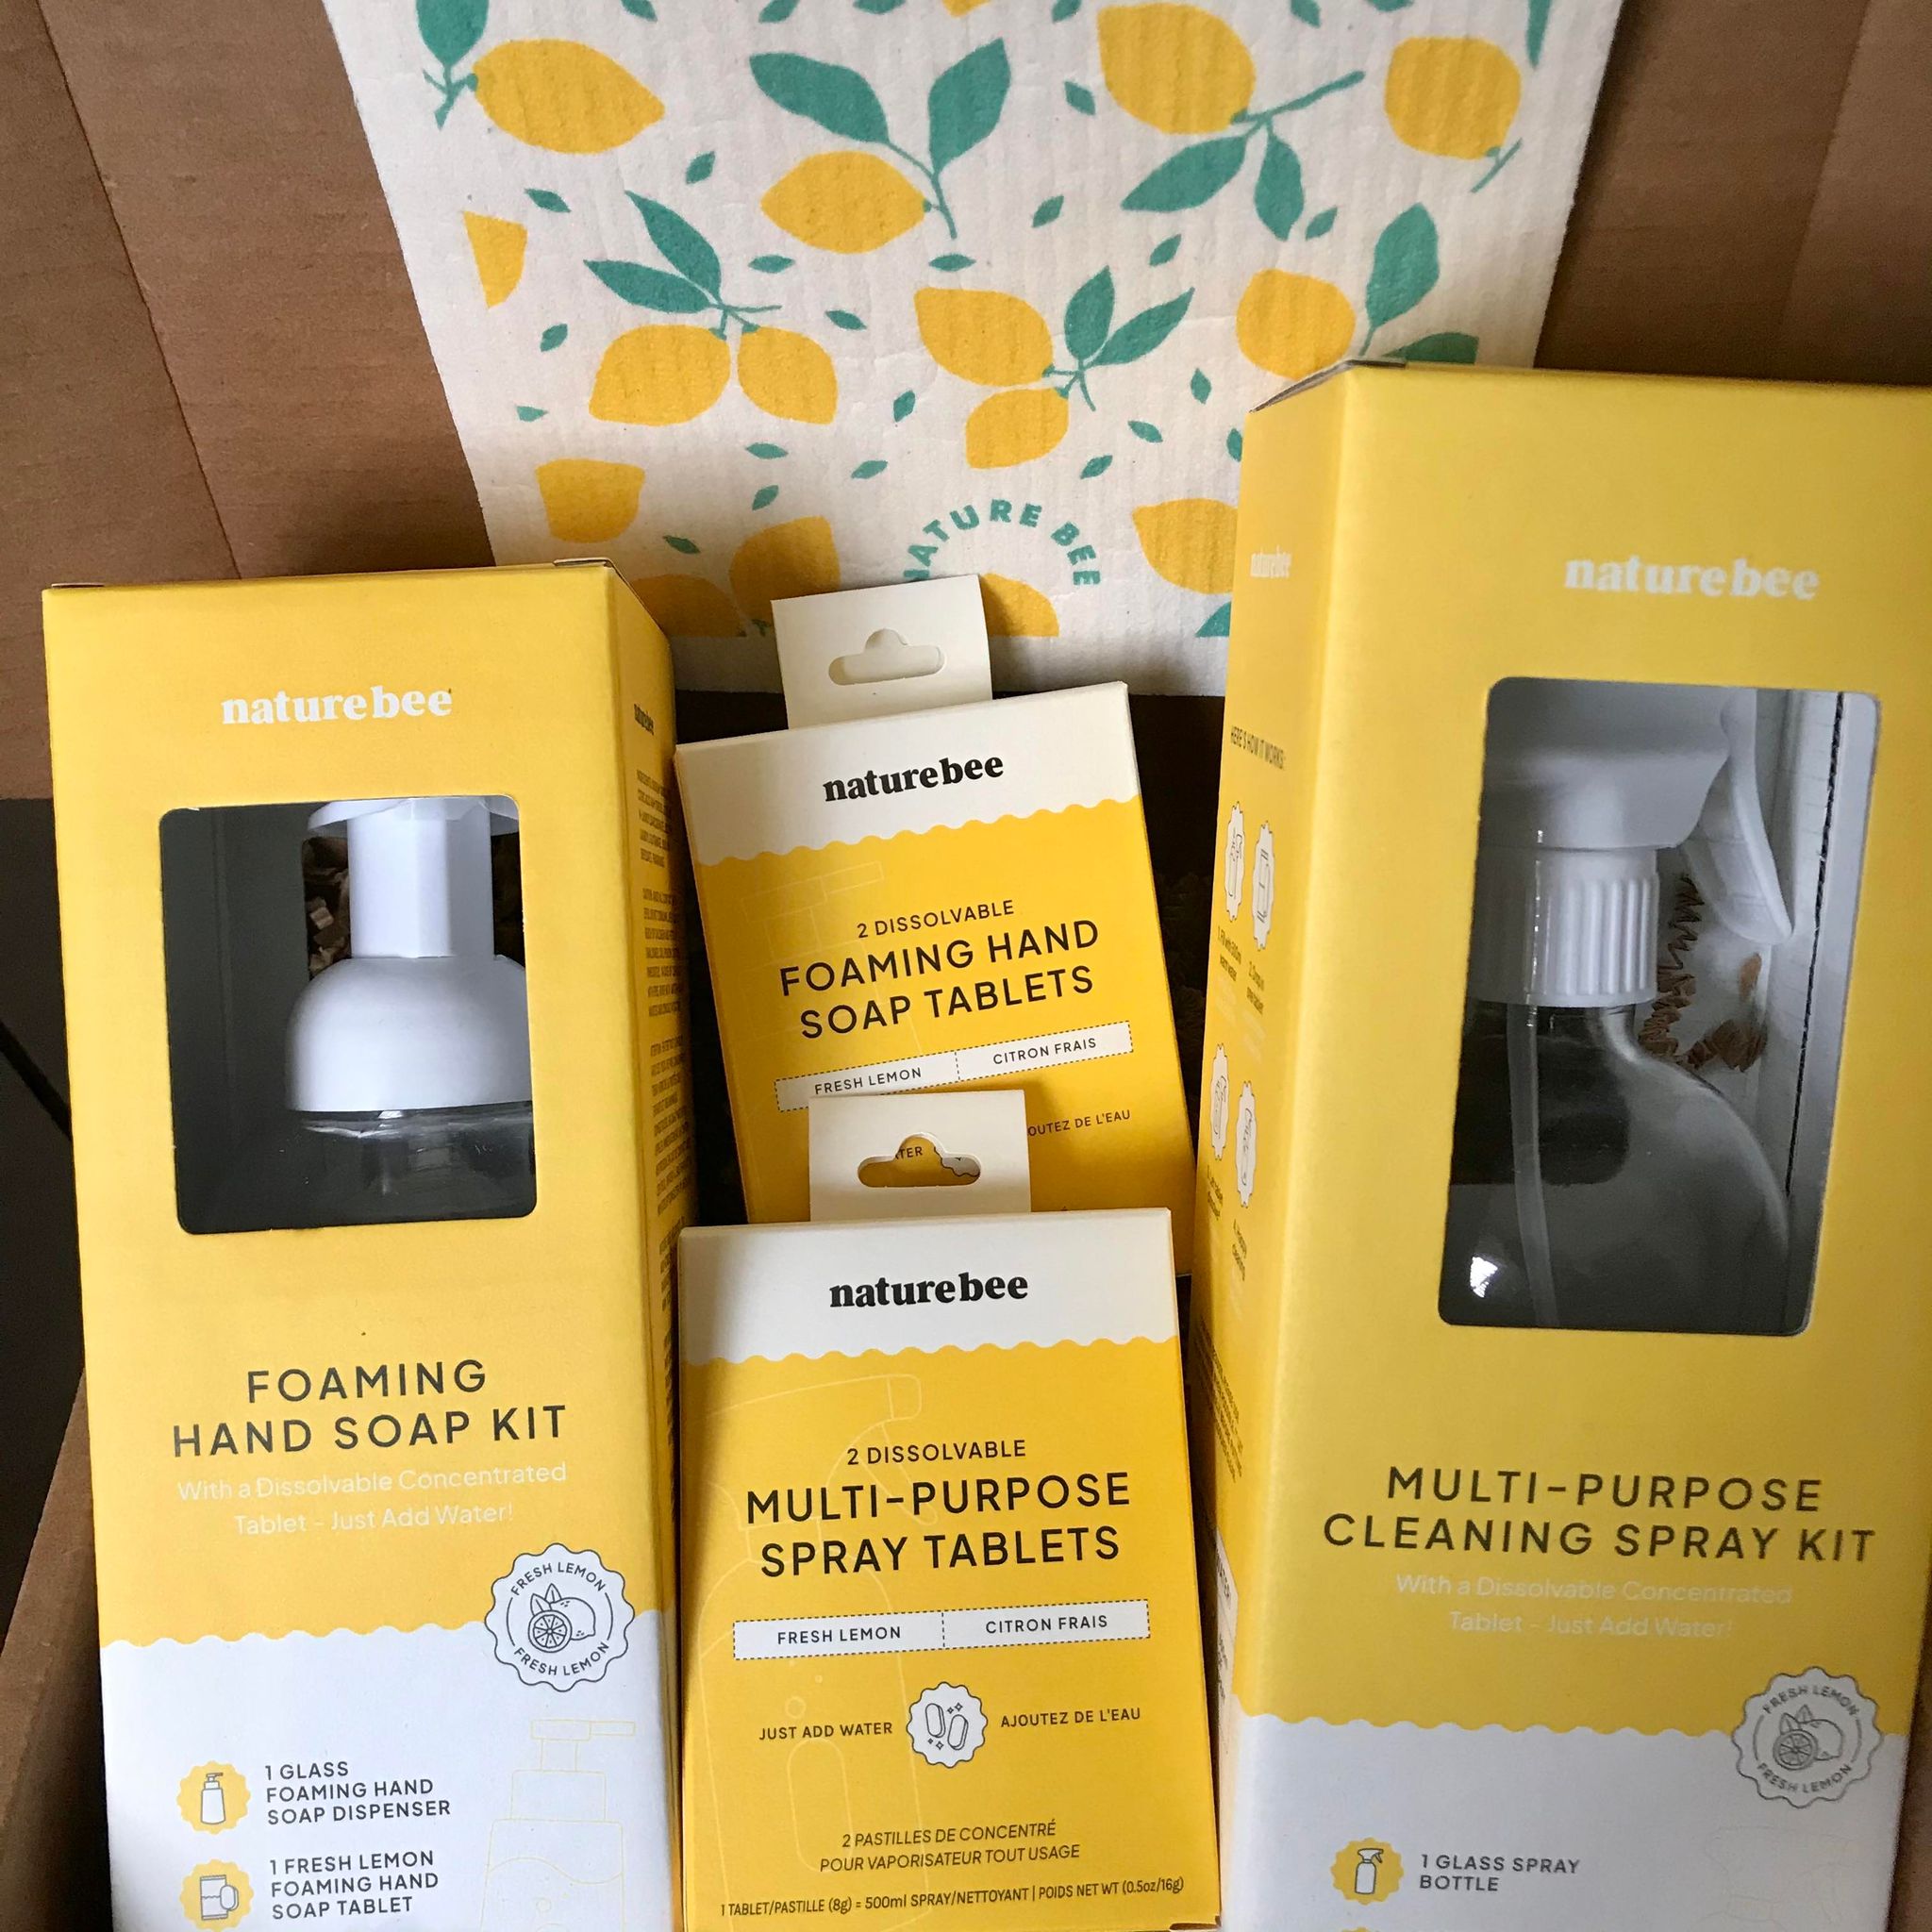 Included in this fresh lemon deluxe giff set is Swedish sponge cloth in a lemon motif on an white background, a foaming hand soap kit, a multi-purpose cleaning spray kit, a 2 pack of foaming hand soap tablets and a 2 pack of multi-purpose spray cleaning tablets